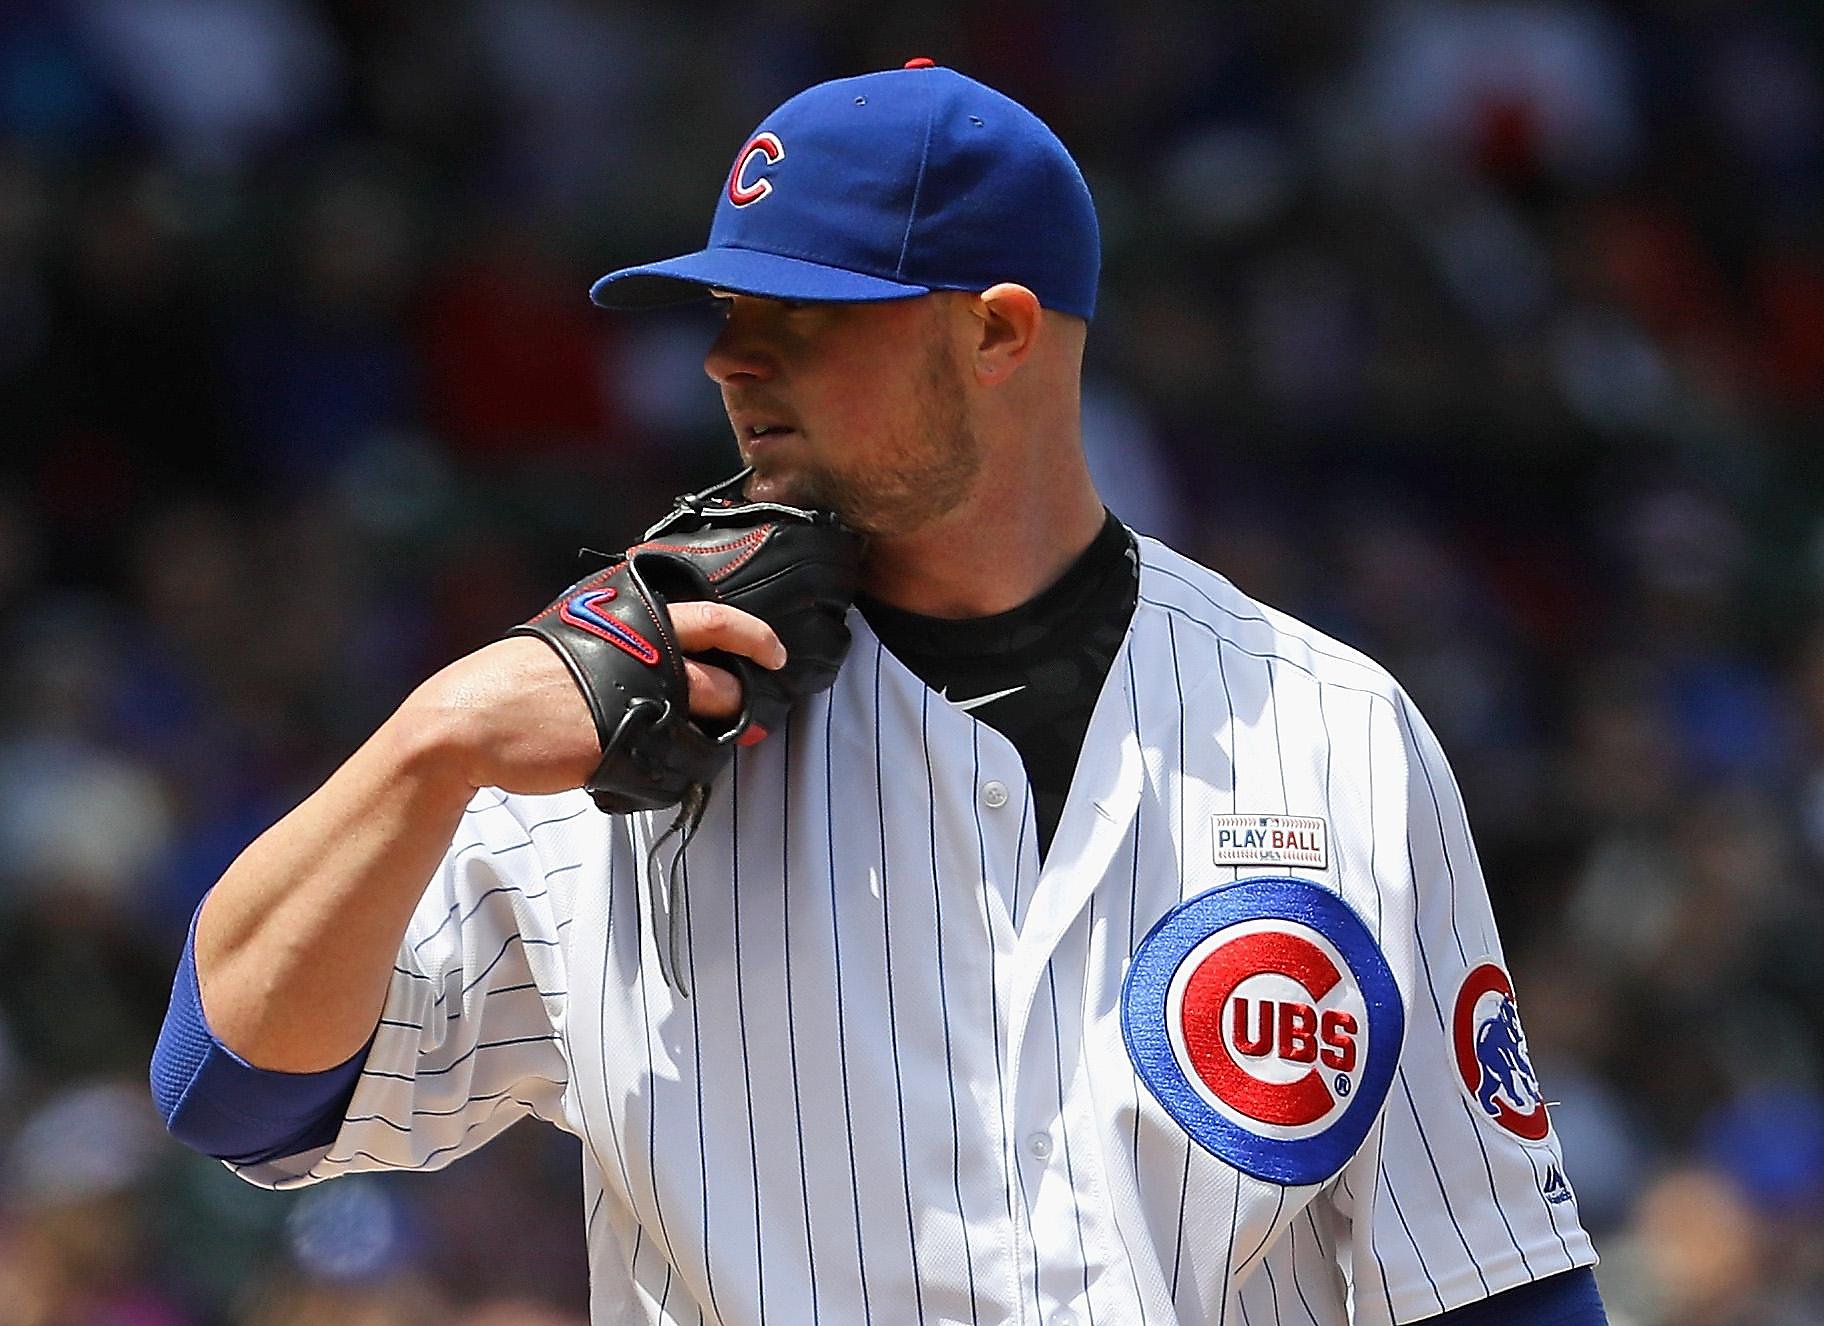 Why Cubs' Lester turned down a bigger offer from Giants